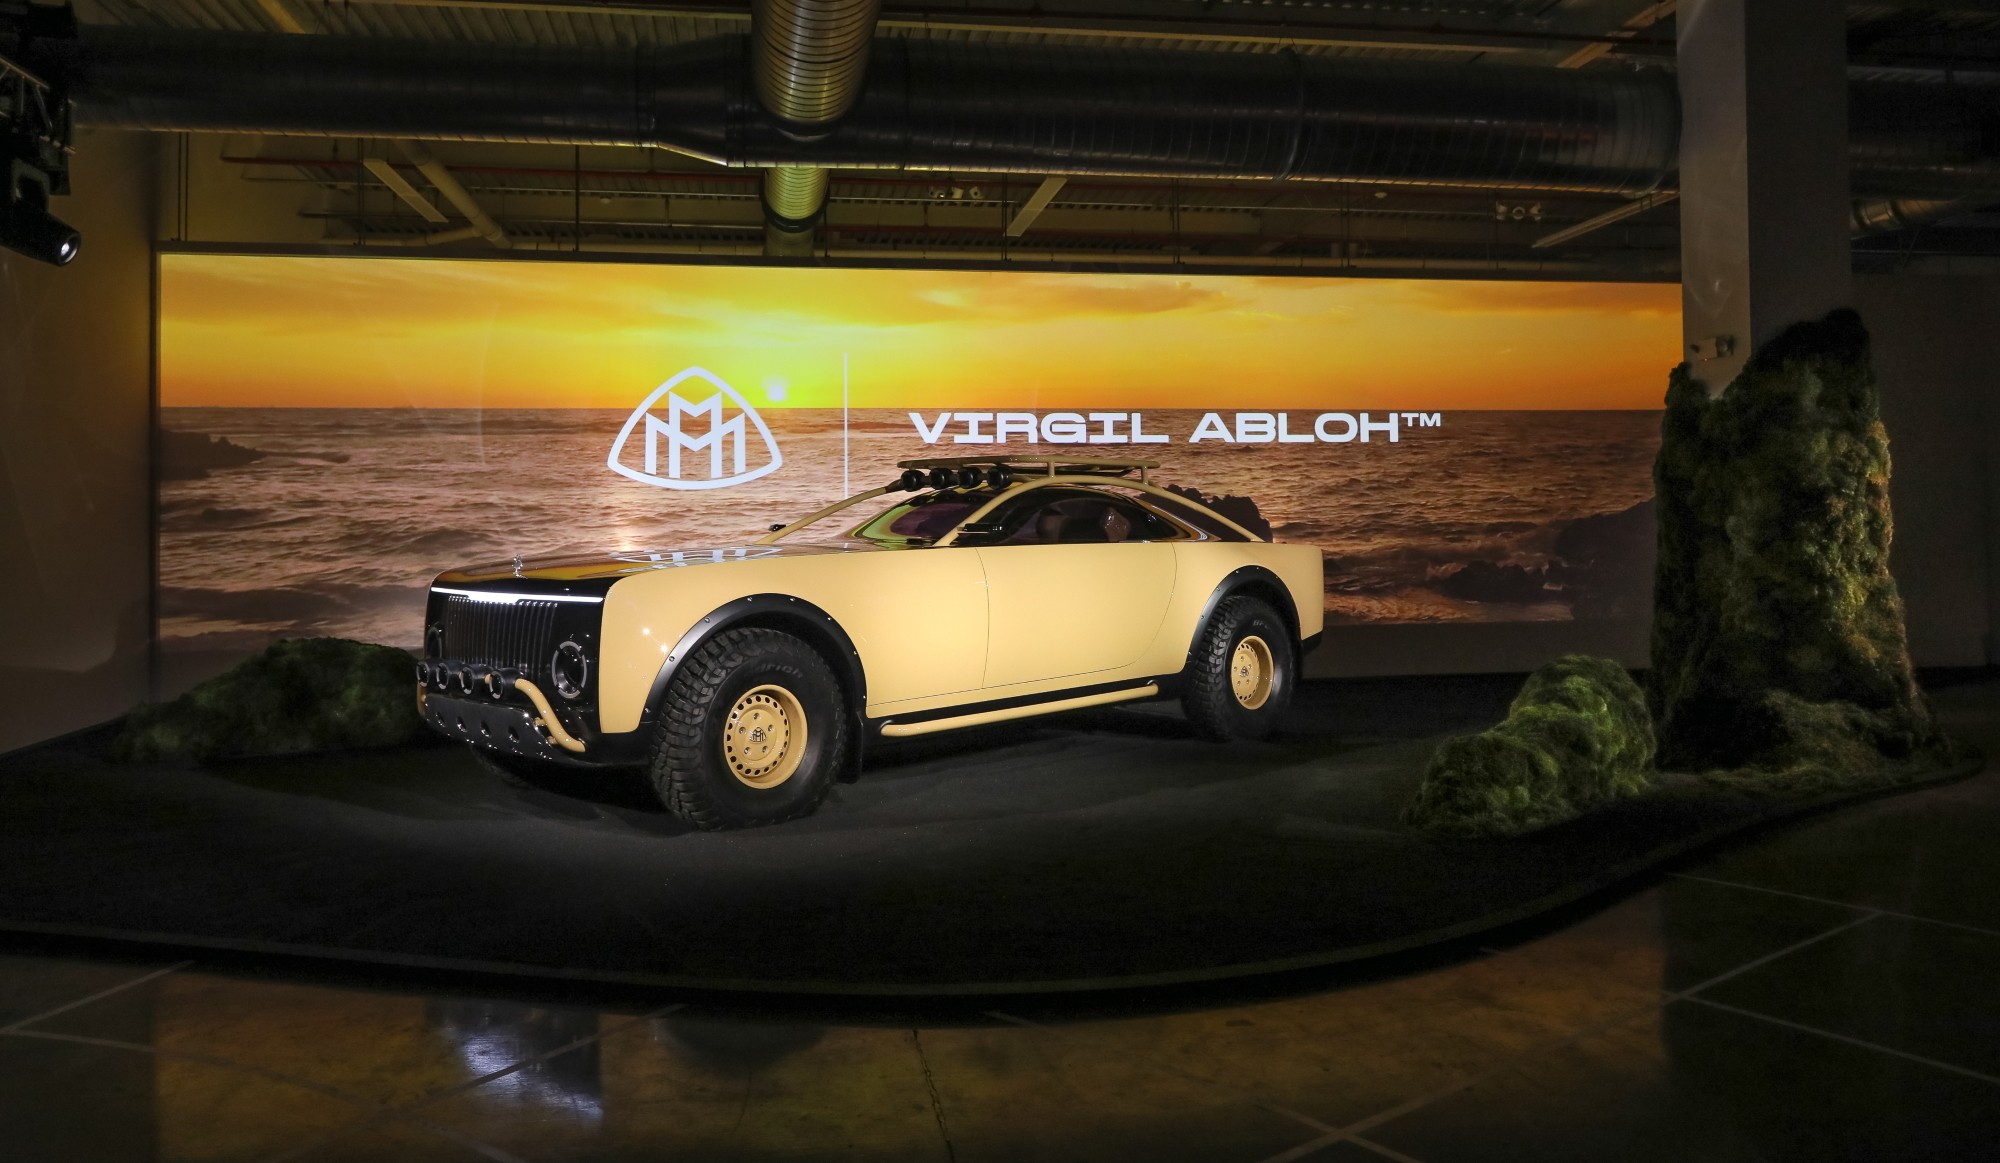 Virgil Abloh and Mercedes-Benz's Project Maybach show car